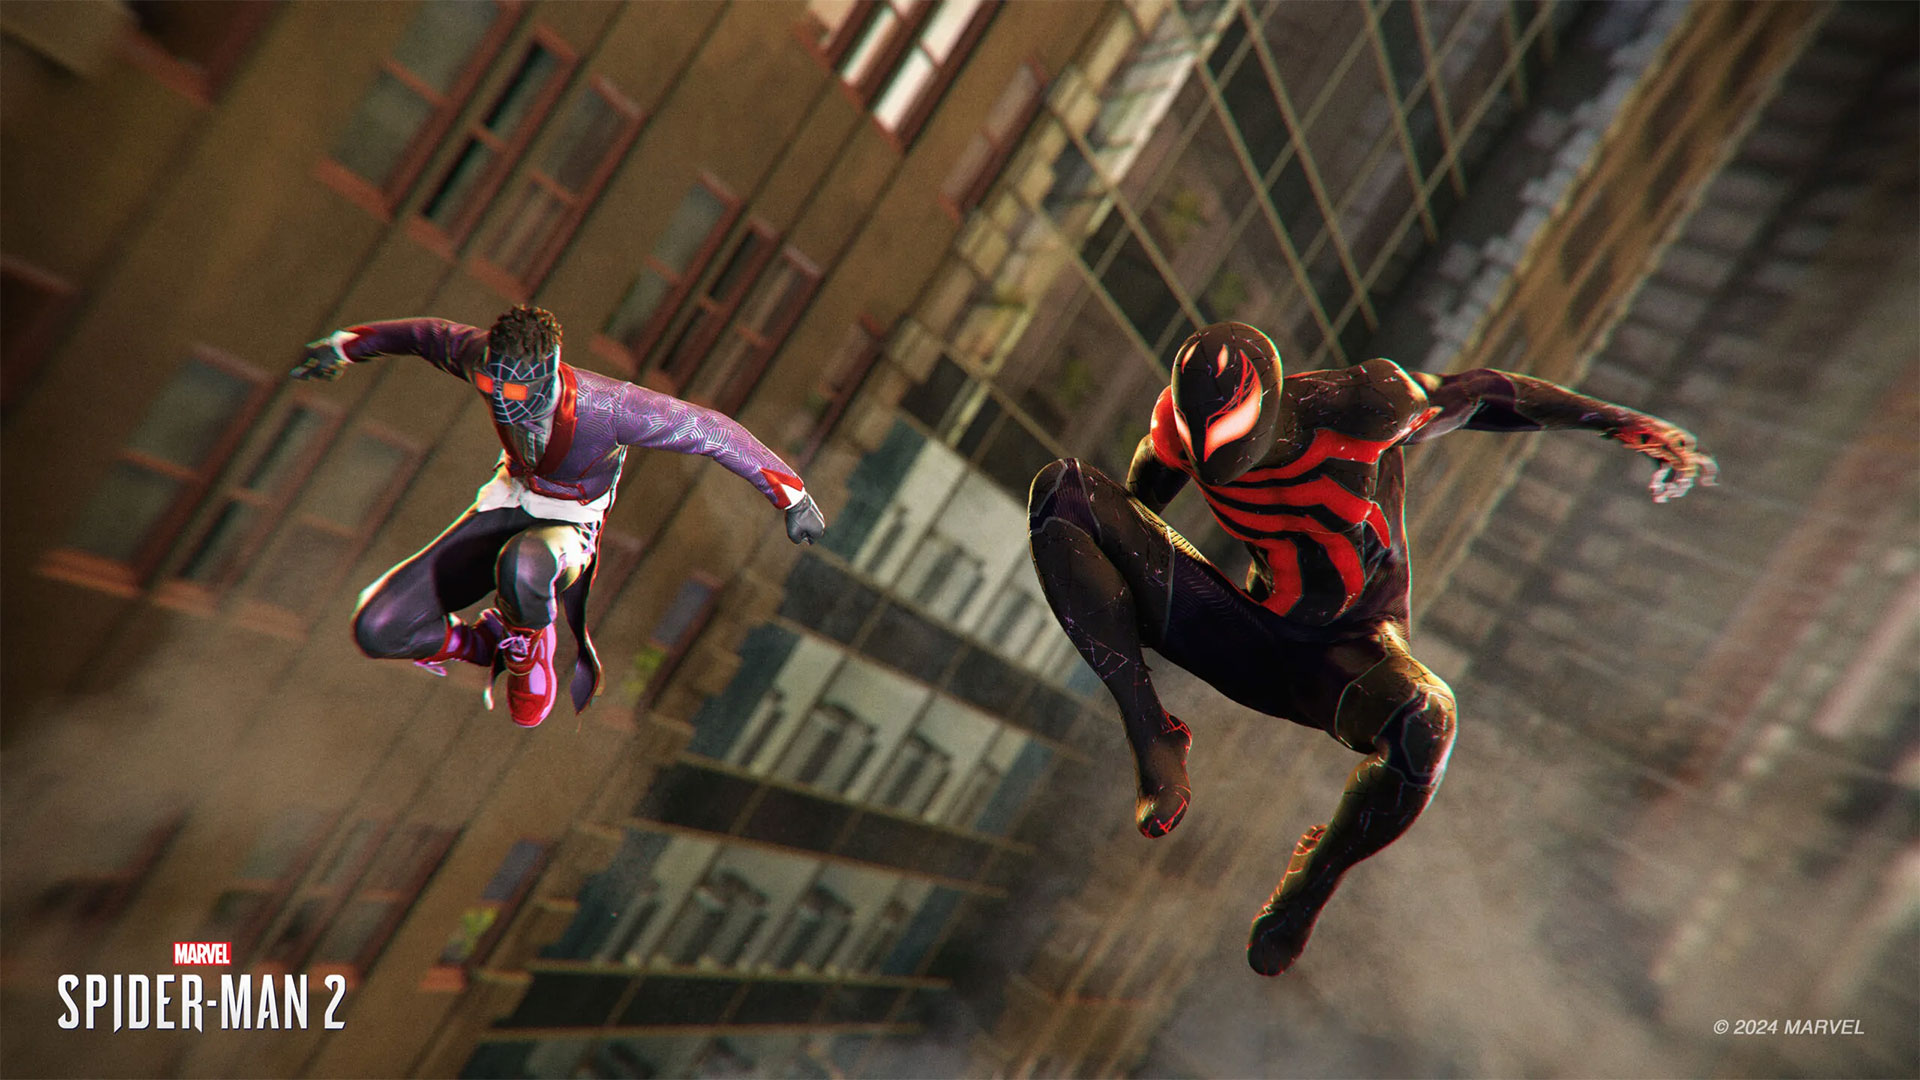 Marvel's Spider-Man 2 version 1.002 brings New Game+ and more